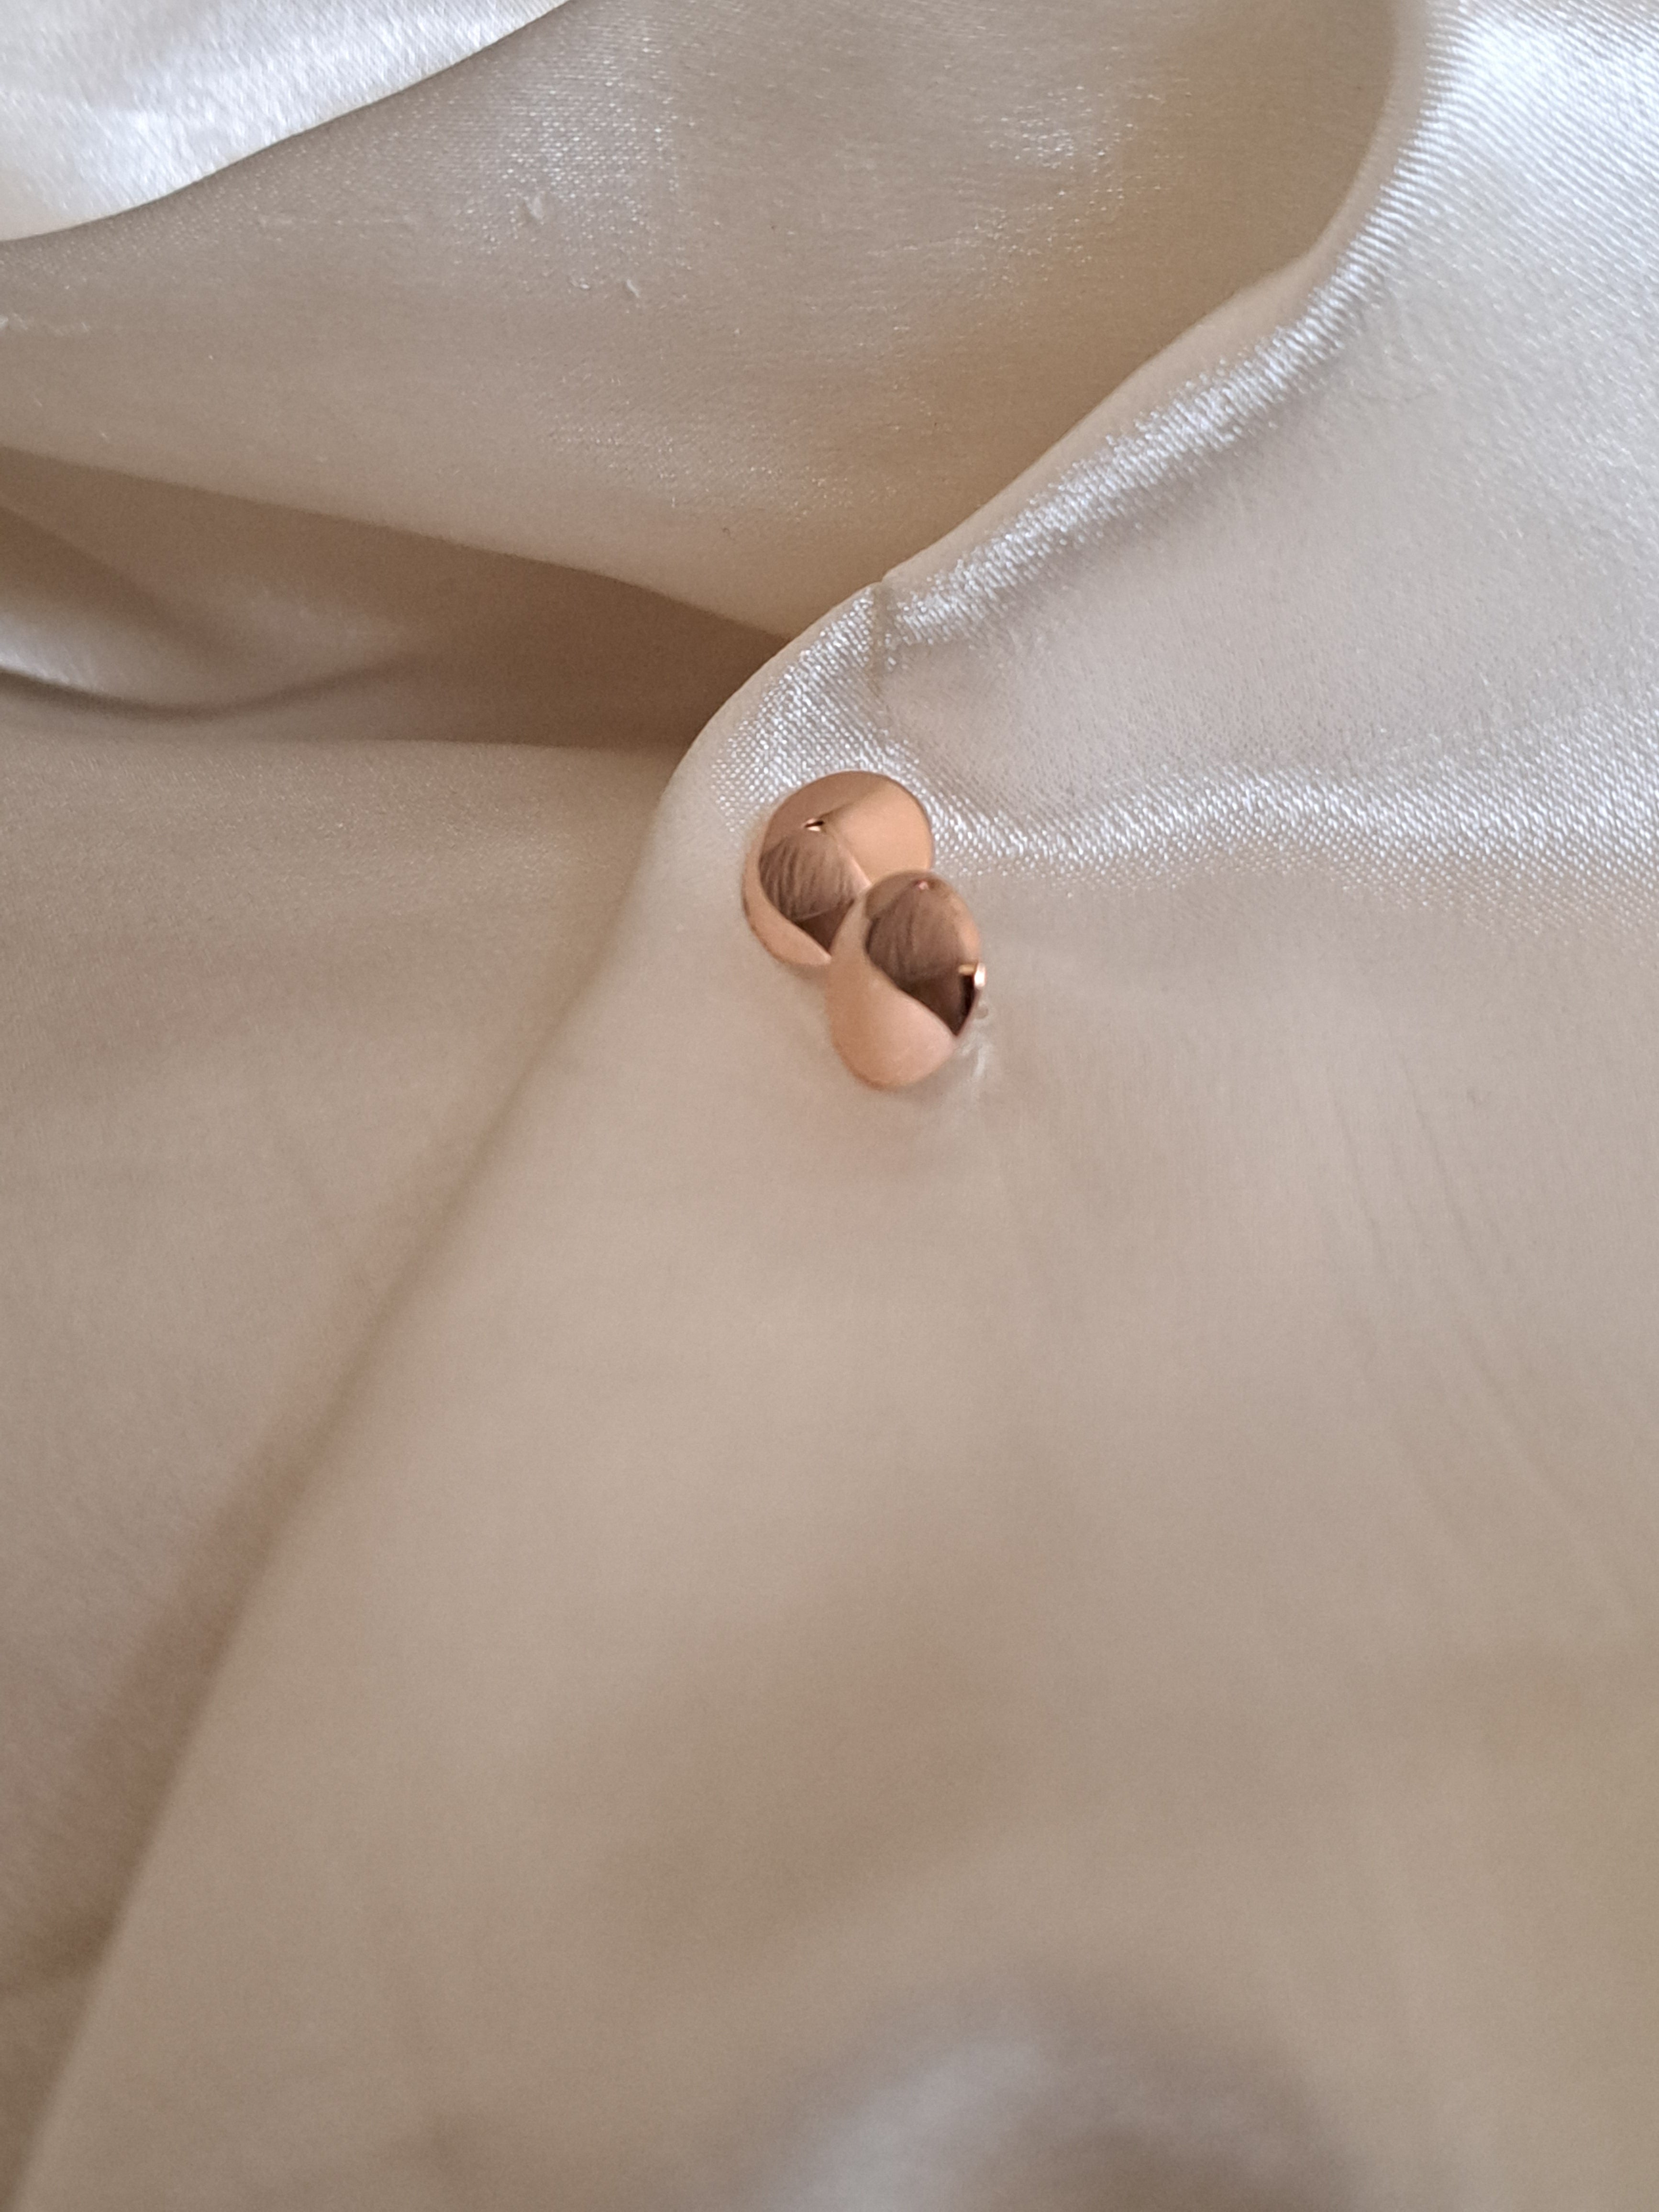 Rose gold dome studs